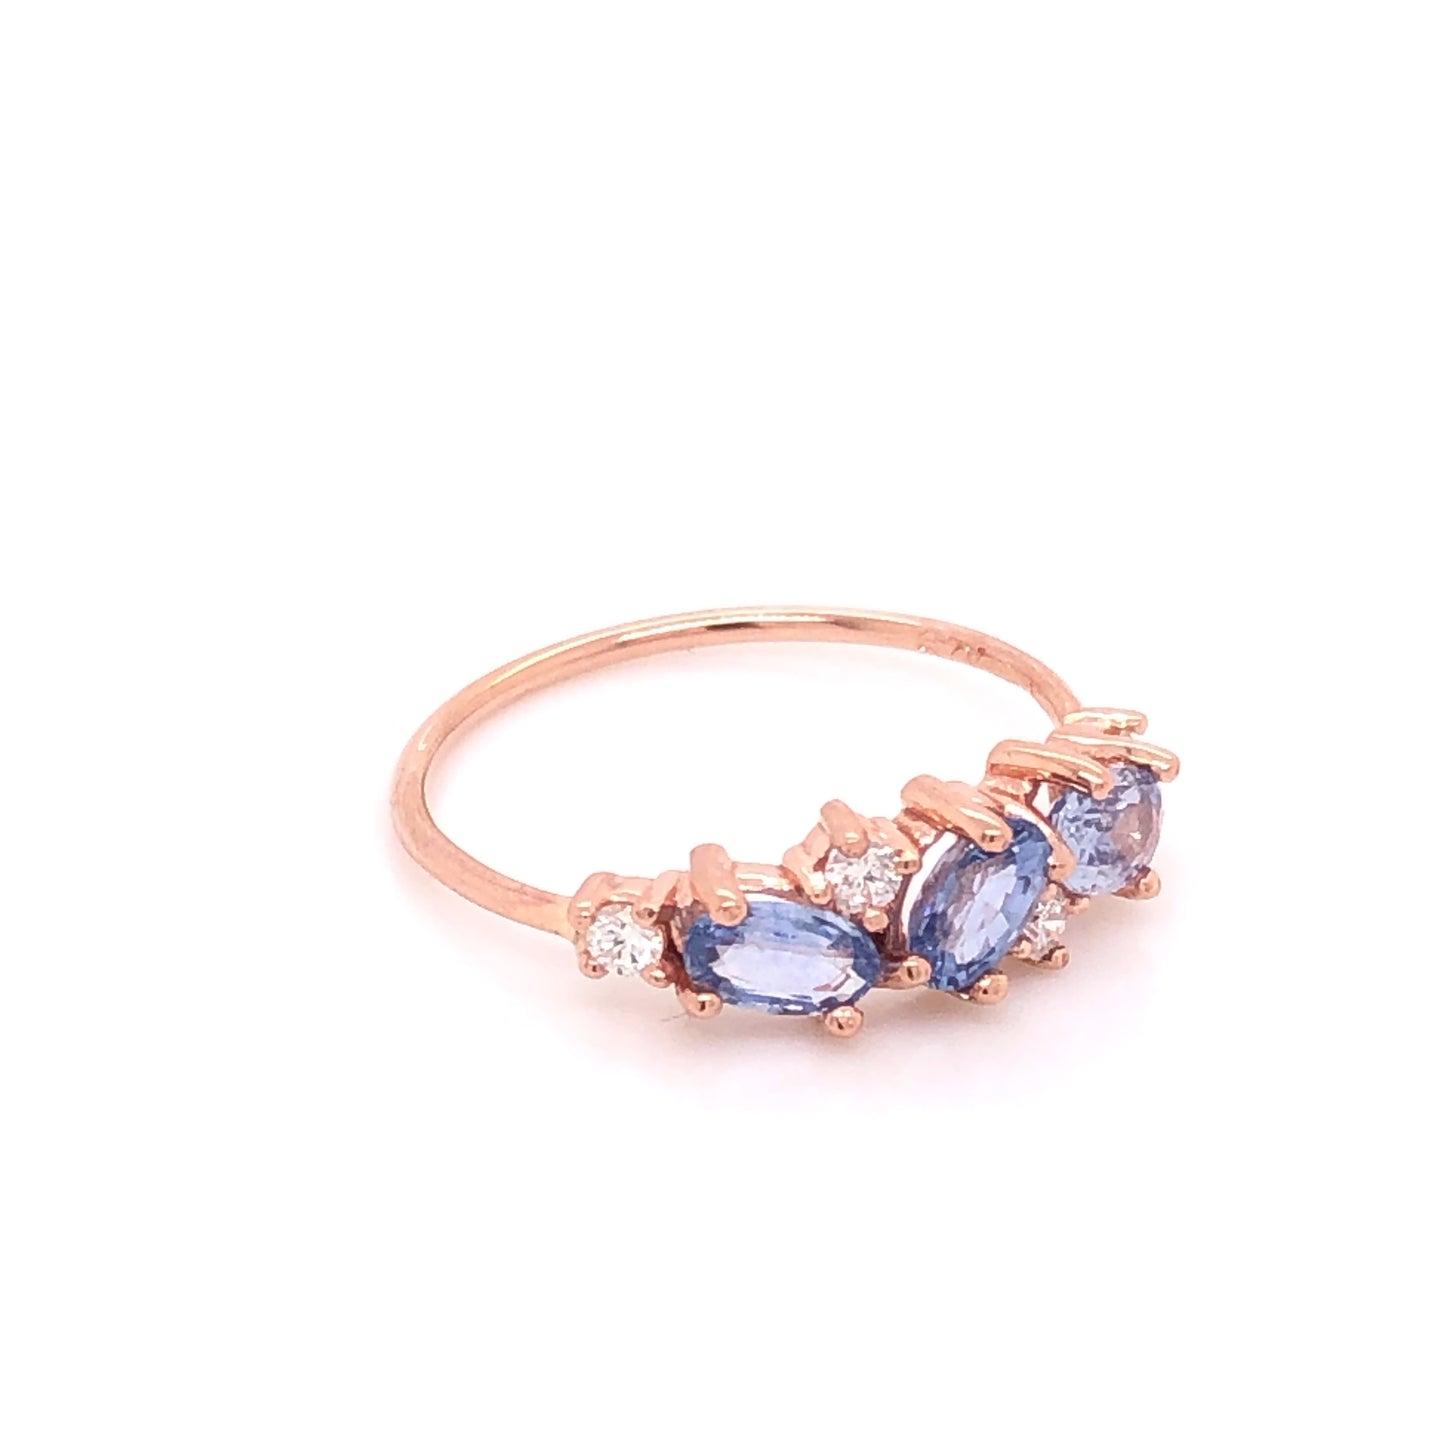 IMMEDIATE DELIVERY / Laura Baby Blue Sapphire Ring / 14k Rose Gold / Size 6